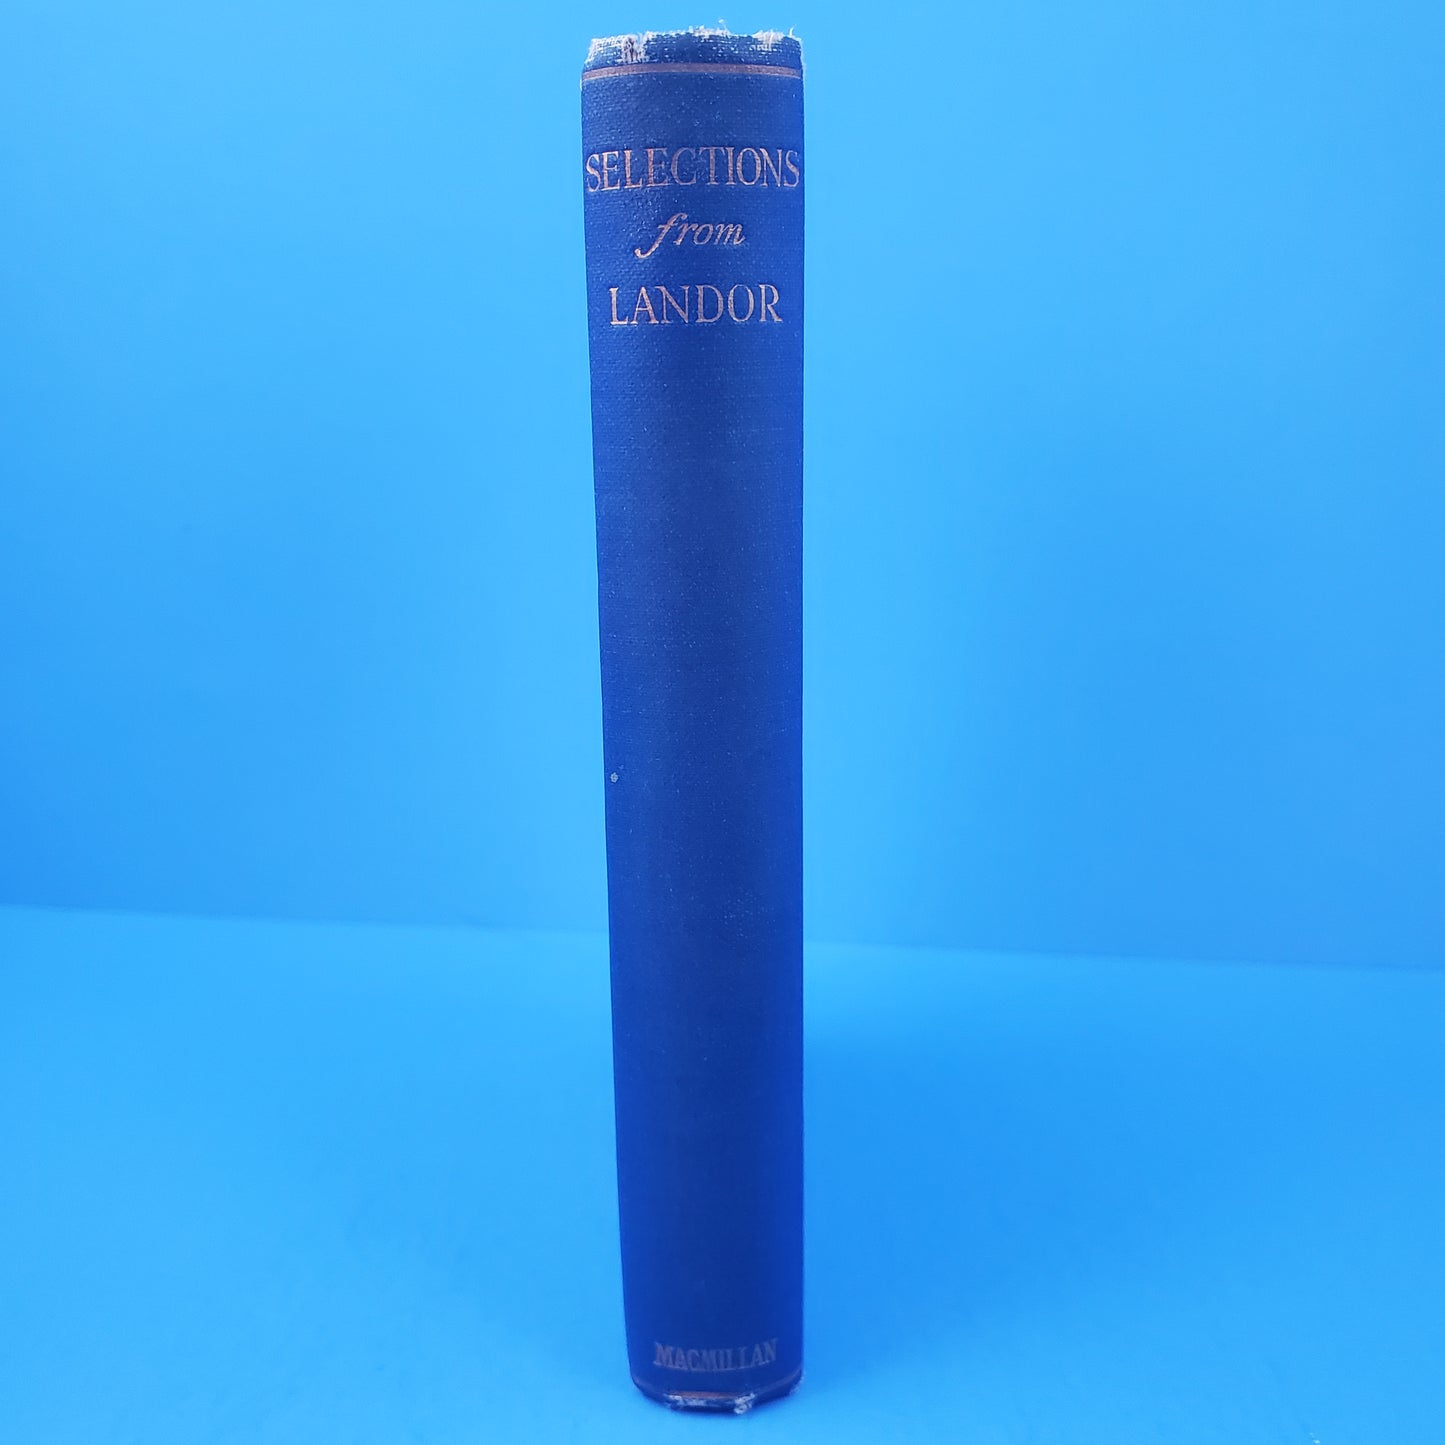 Selections from the Writings of Walter Savage Landor